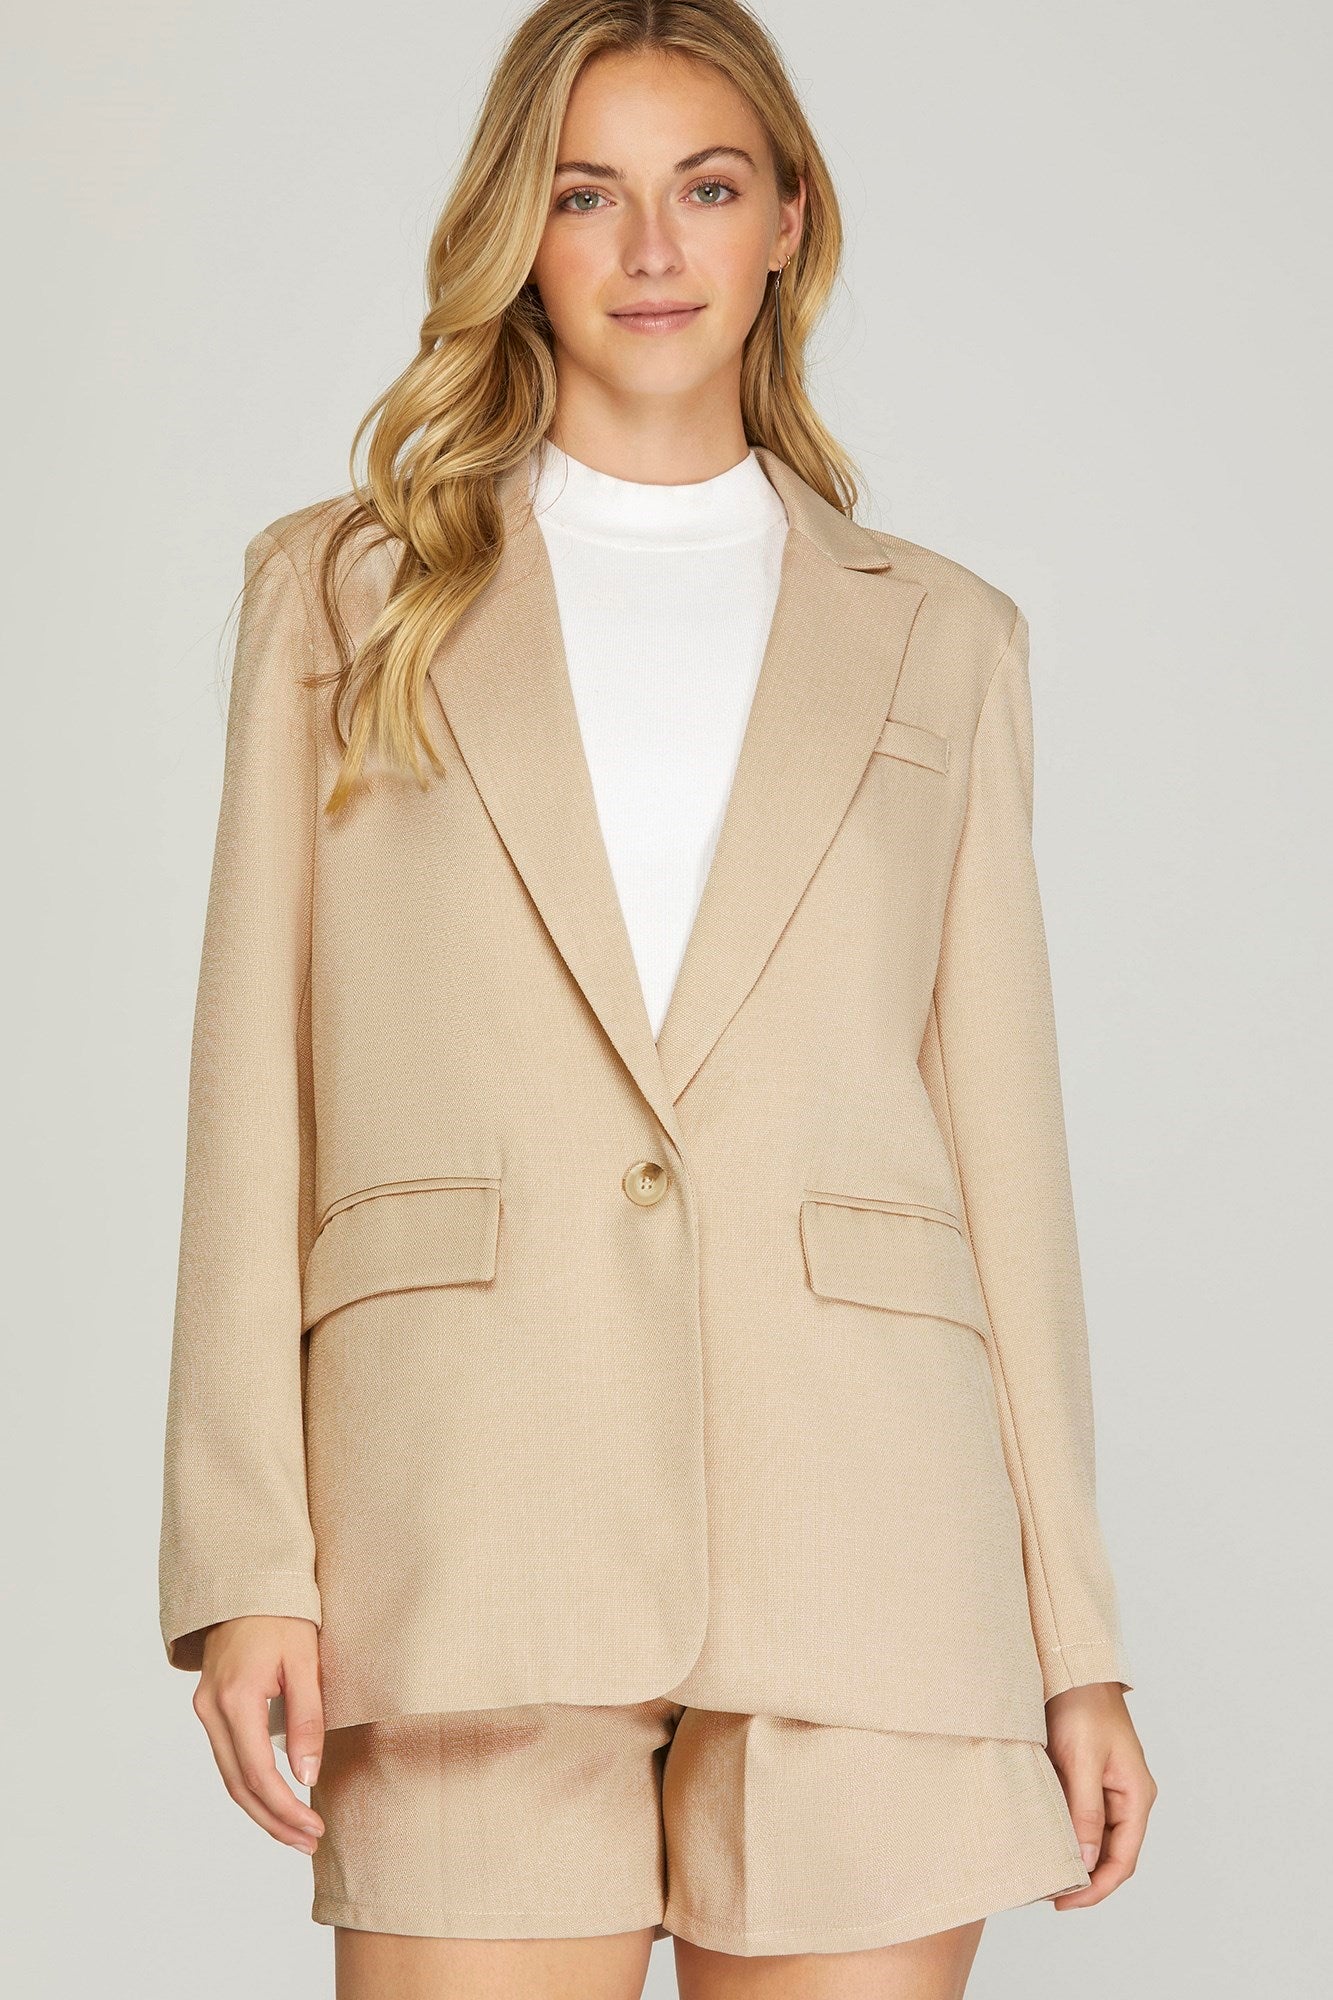 SINGLE BREASTED WOVEN BLAZER WITH POCKETS - LITE TAUPE